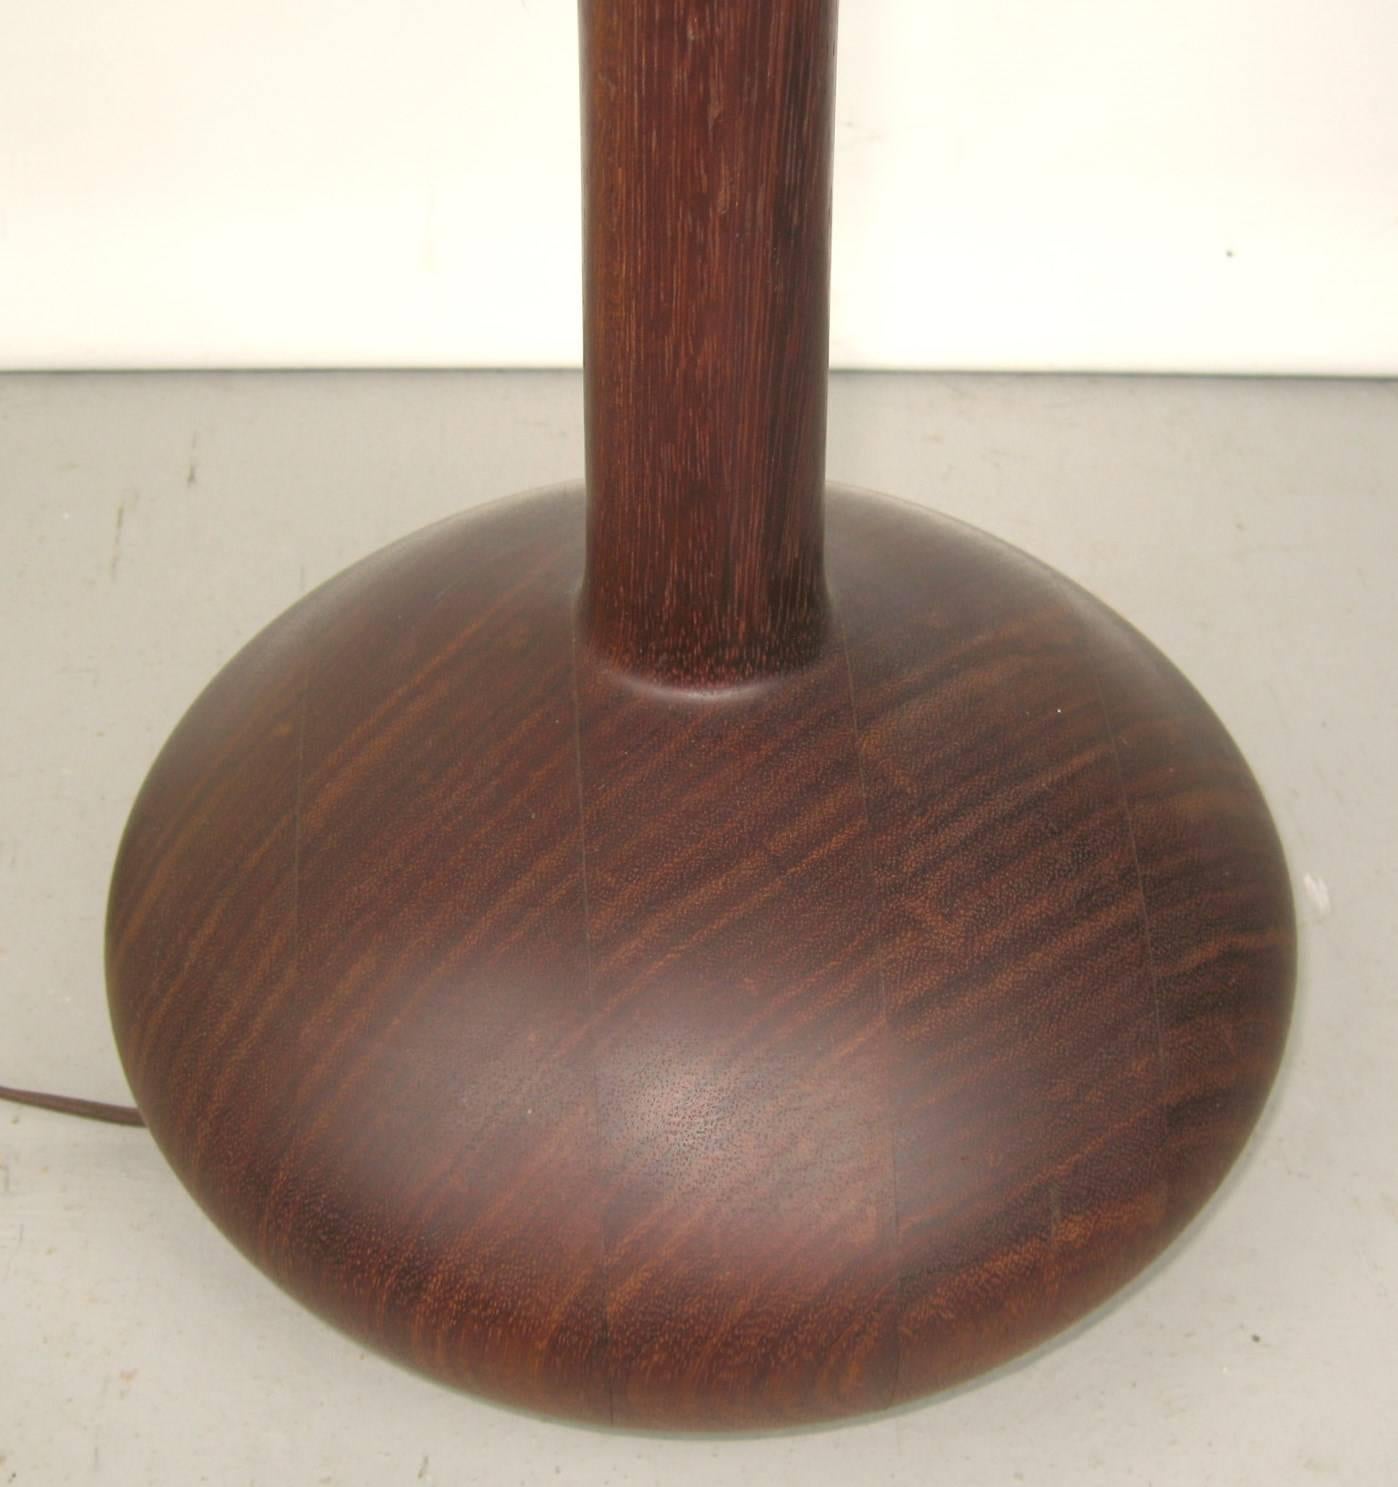 1950s-1960s stunning Mid-Century Modern teak wood table lamp. Measuring: 28.5 in down from finial to base. 19.5 in high 9 in diameter on the base, 1.75 in on the shaft. Be sure to check our storefront for many more decorating ideas, from primitives,